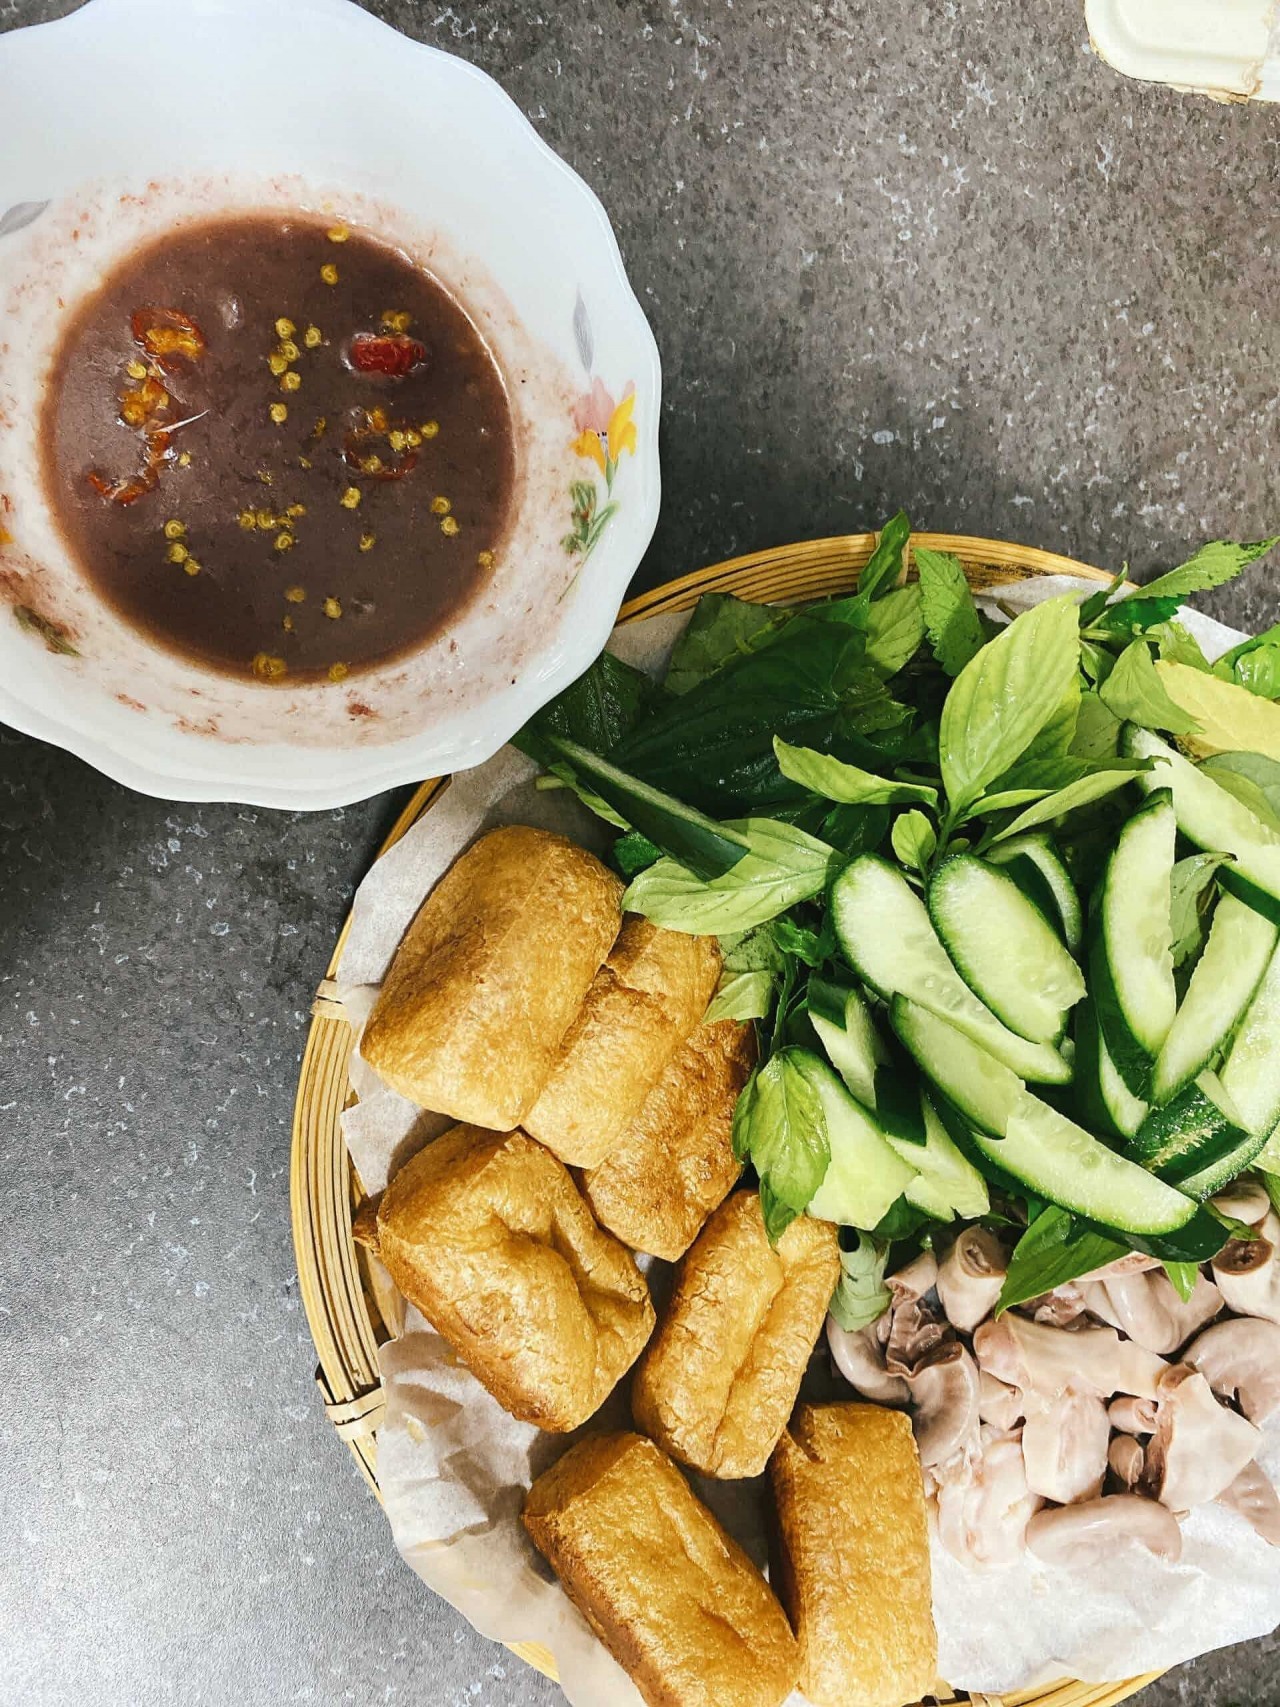 Dong Nhi's improvised vermicelli and dried tofu with shrimp paste. Photo: NVCC